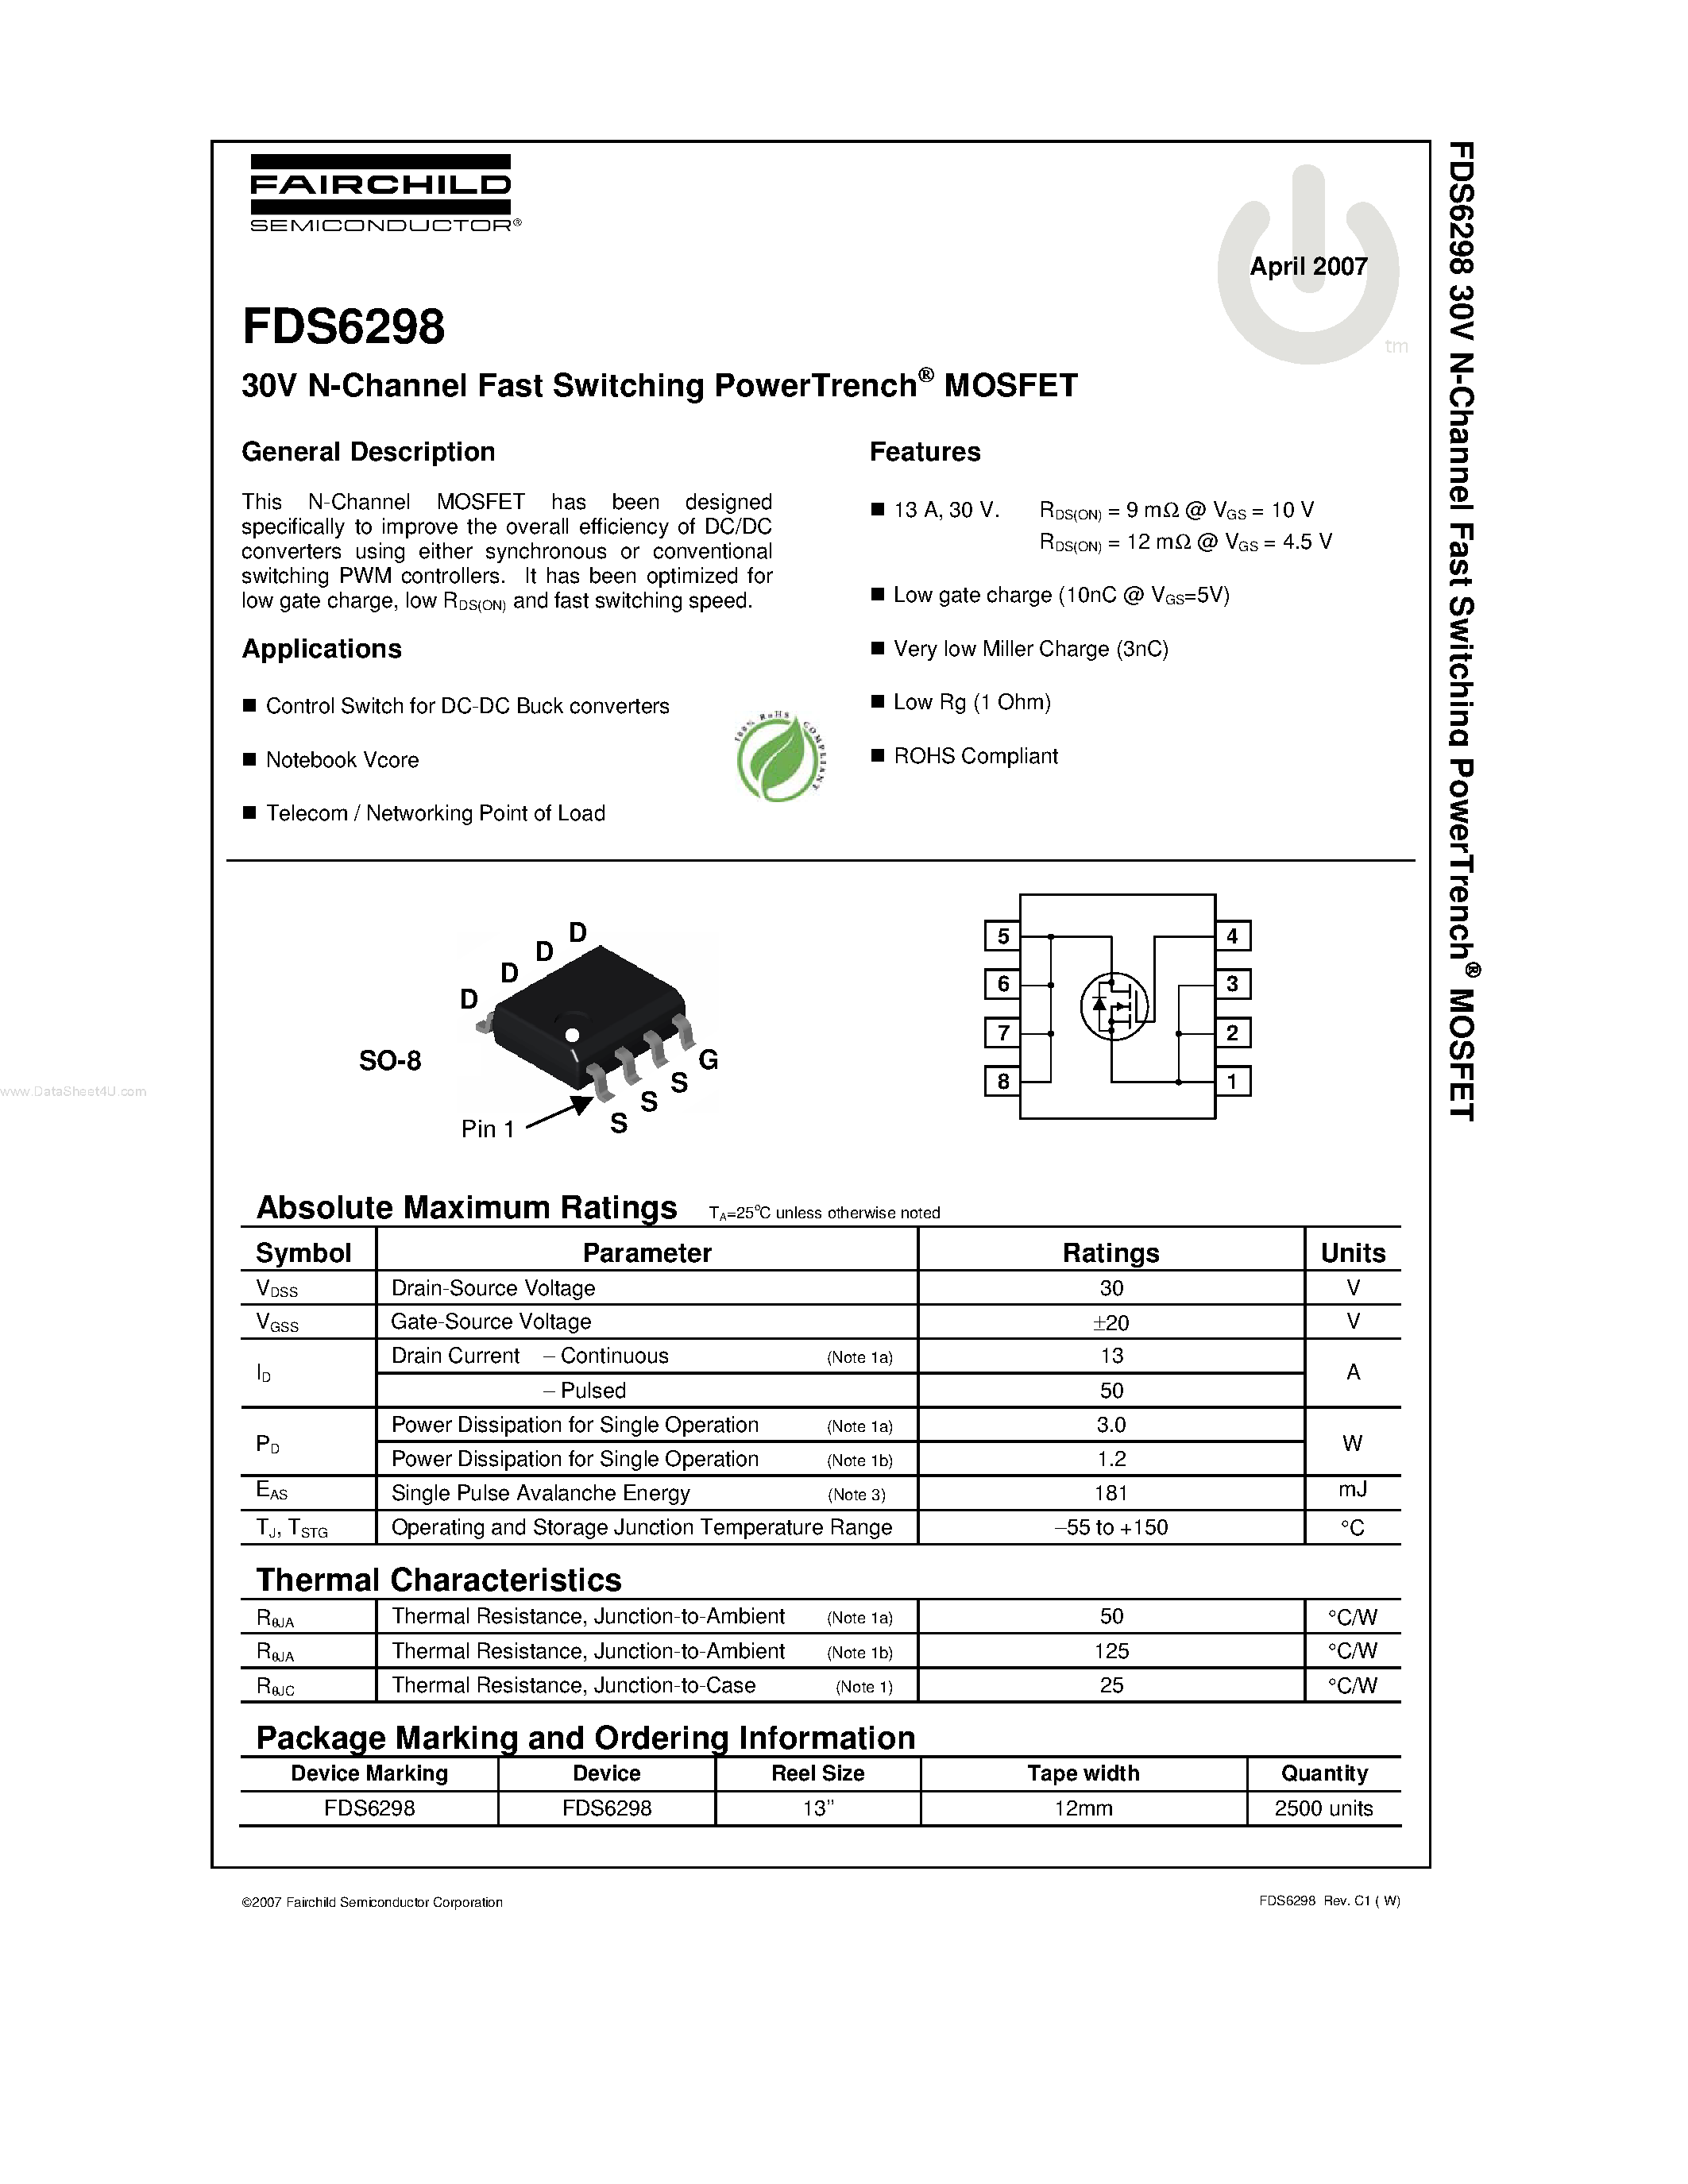 Даташит FDS6298 - 30V N-Channel Fast Switching PowerTrench MOSFET страница 1